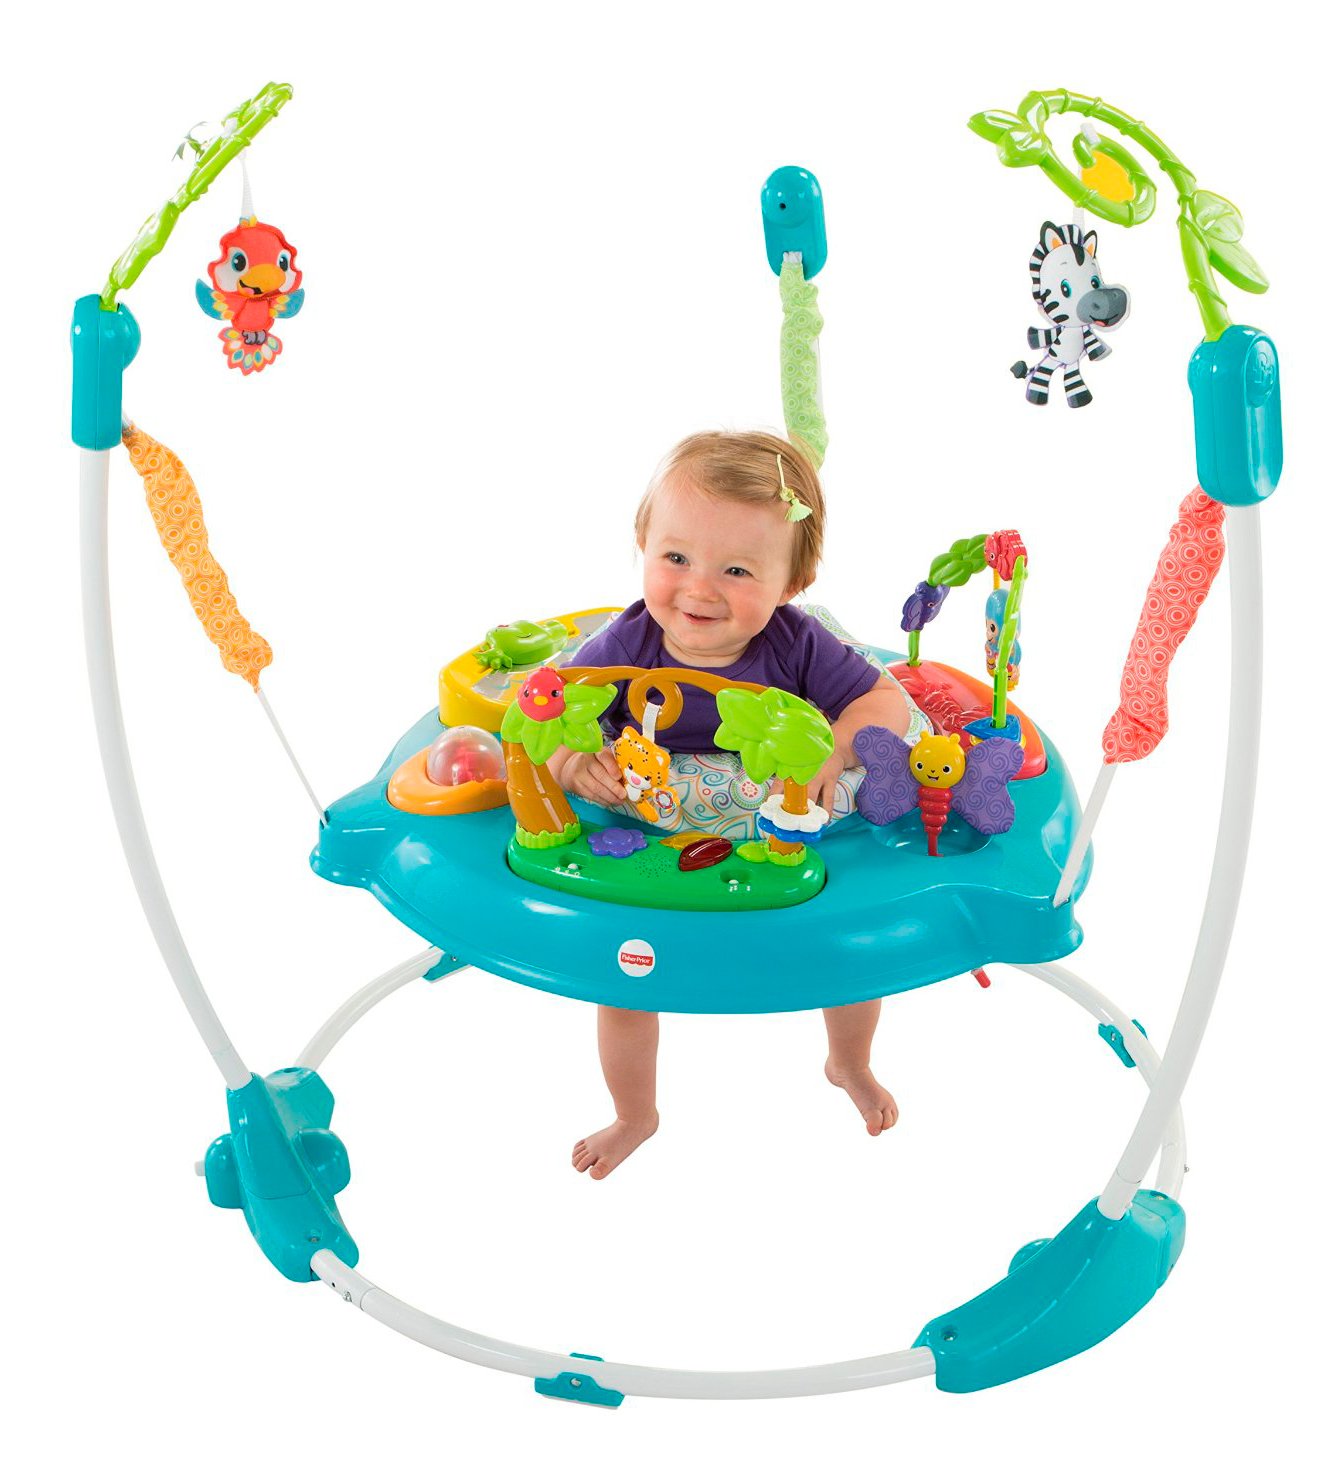 7 Best Fisher Price Jumperoo Reviews in 2023 7